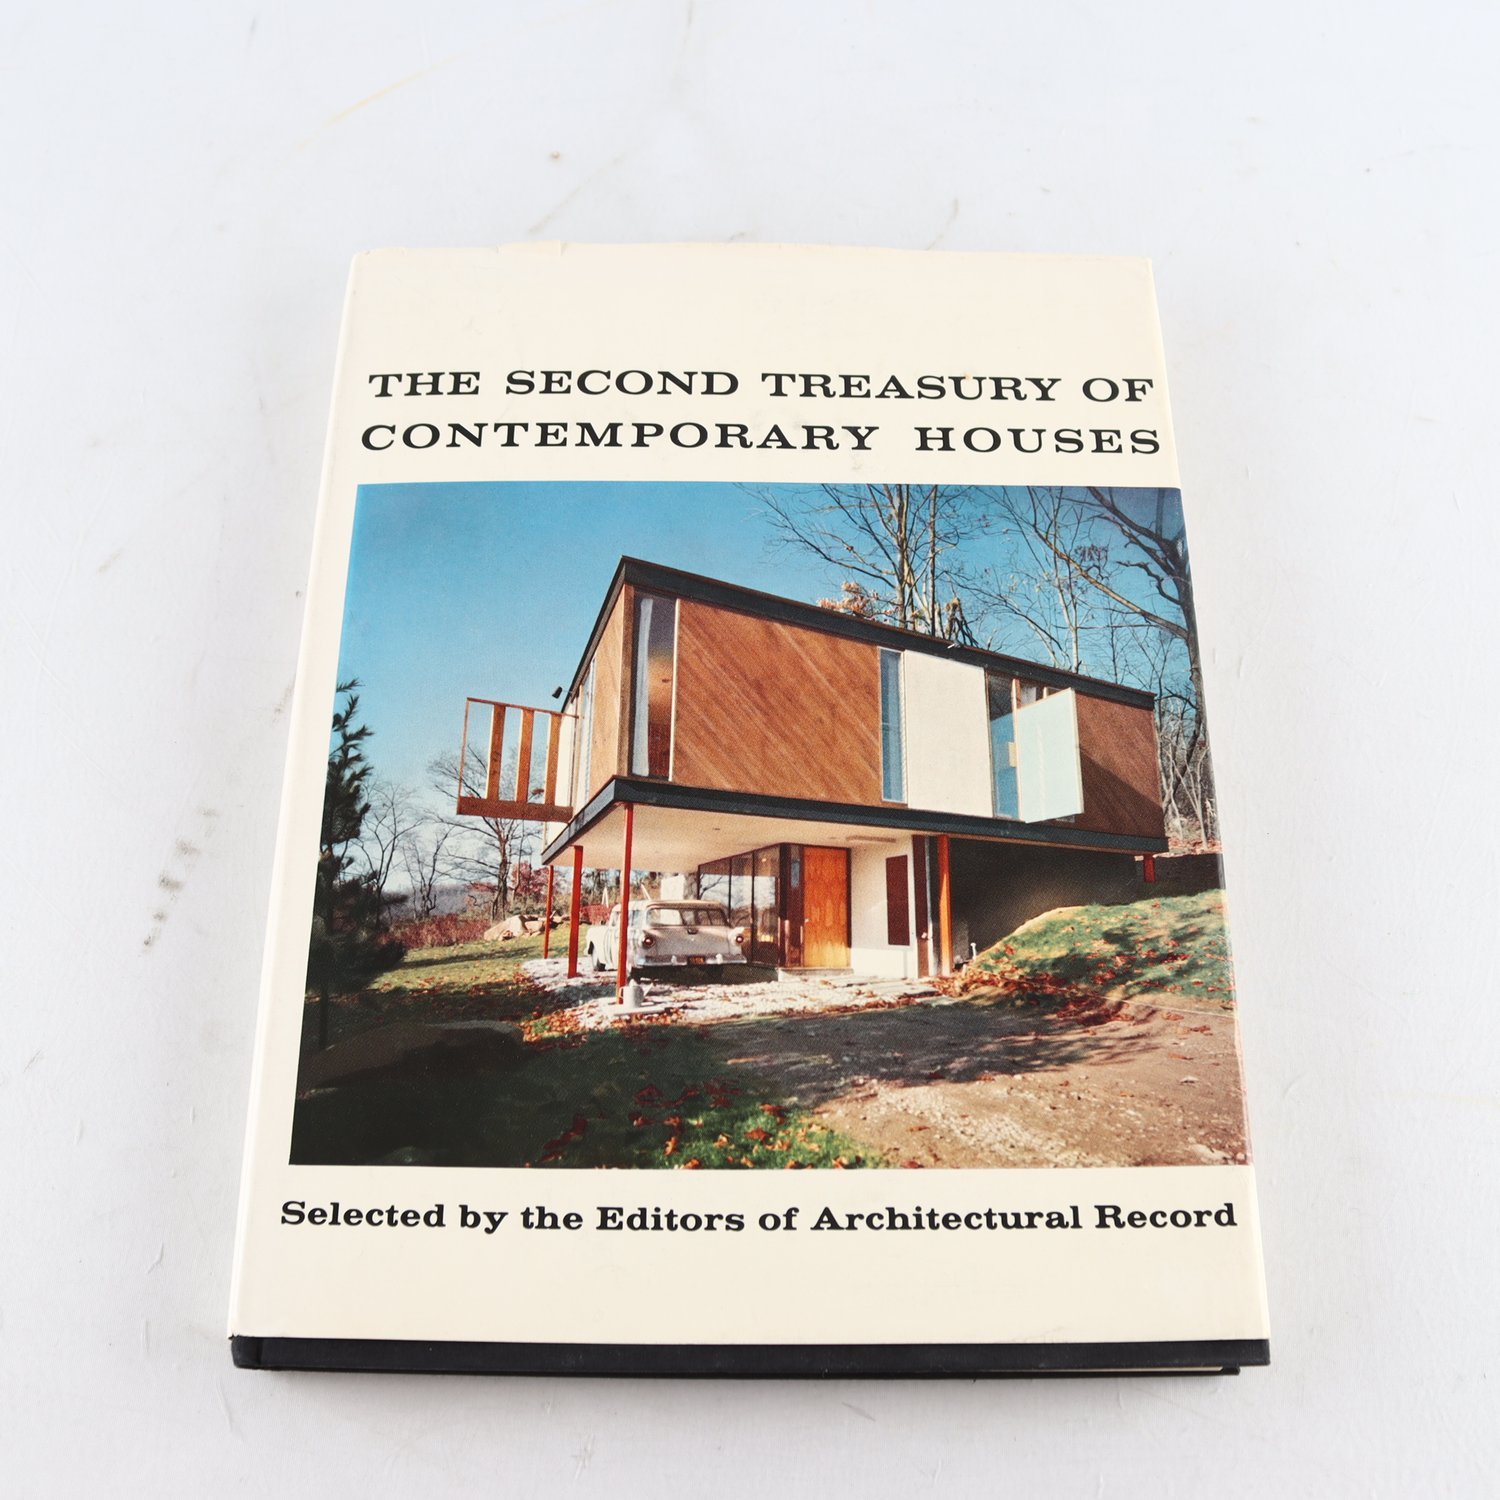 The Second Treasury of Contemporary Houses (1959)